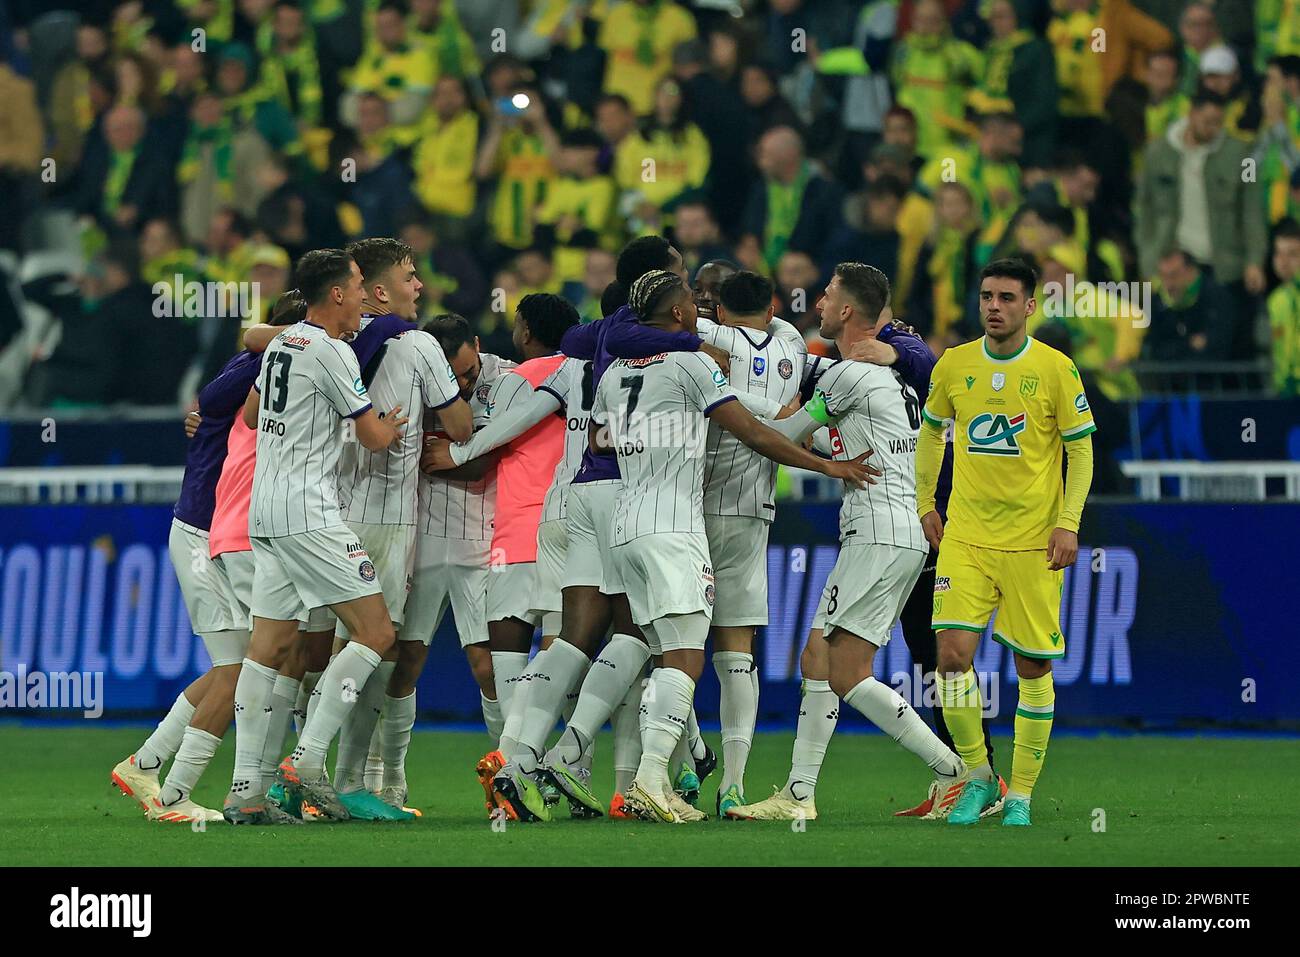 Toulouse players celebrate after winning the French Cup final soccer match between Nantes and Toulouse, at the Stade de France in Saint-Denis, outside Paris, Saturday, April 29, 2023